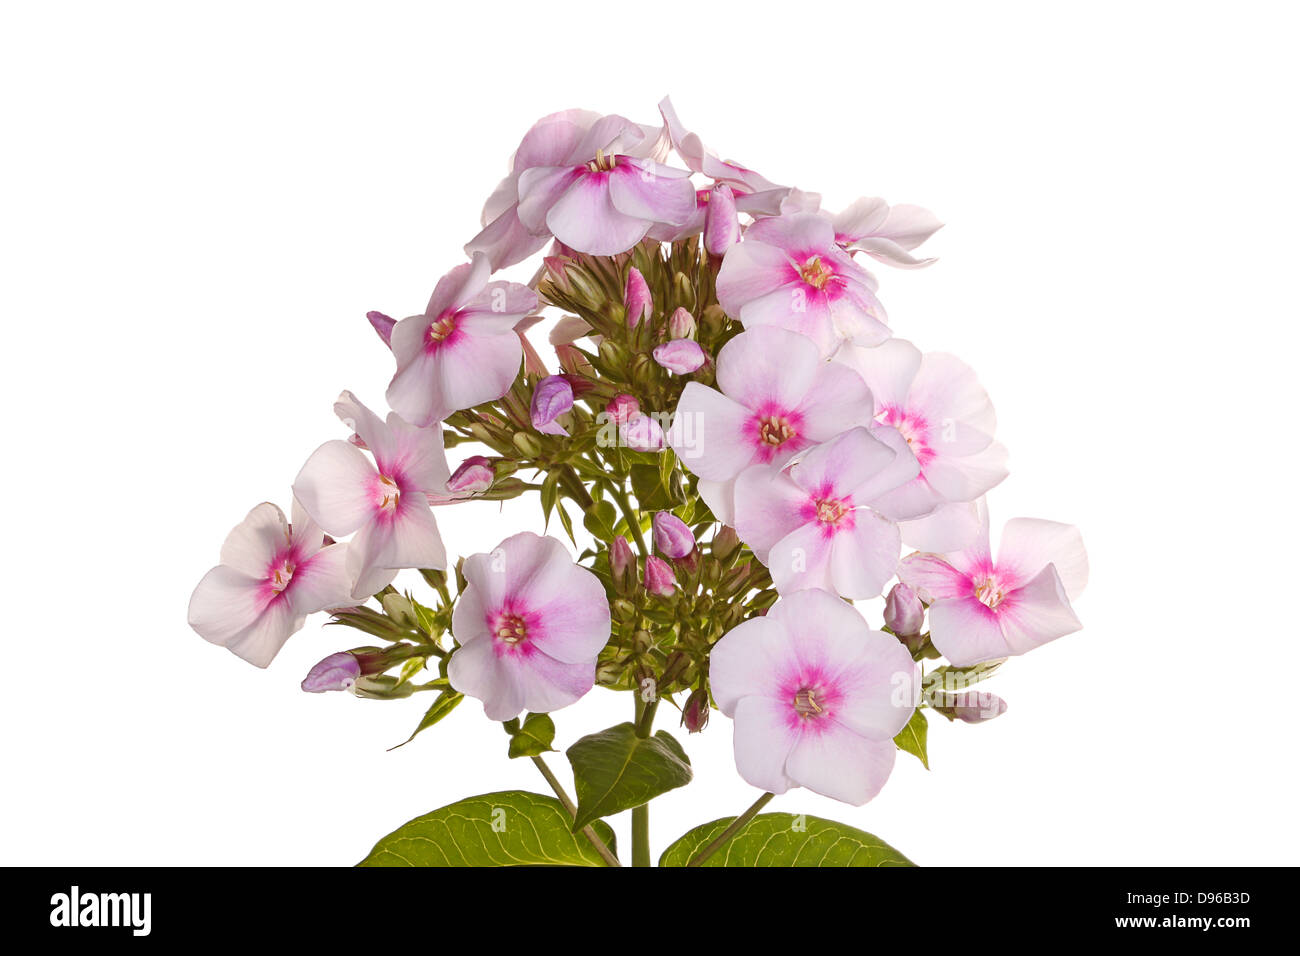 A single stem with many white and pink flowers of phlox (Phlox paniculata) and leaves isolated against a white background Stock Photo